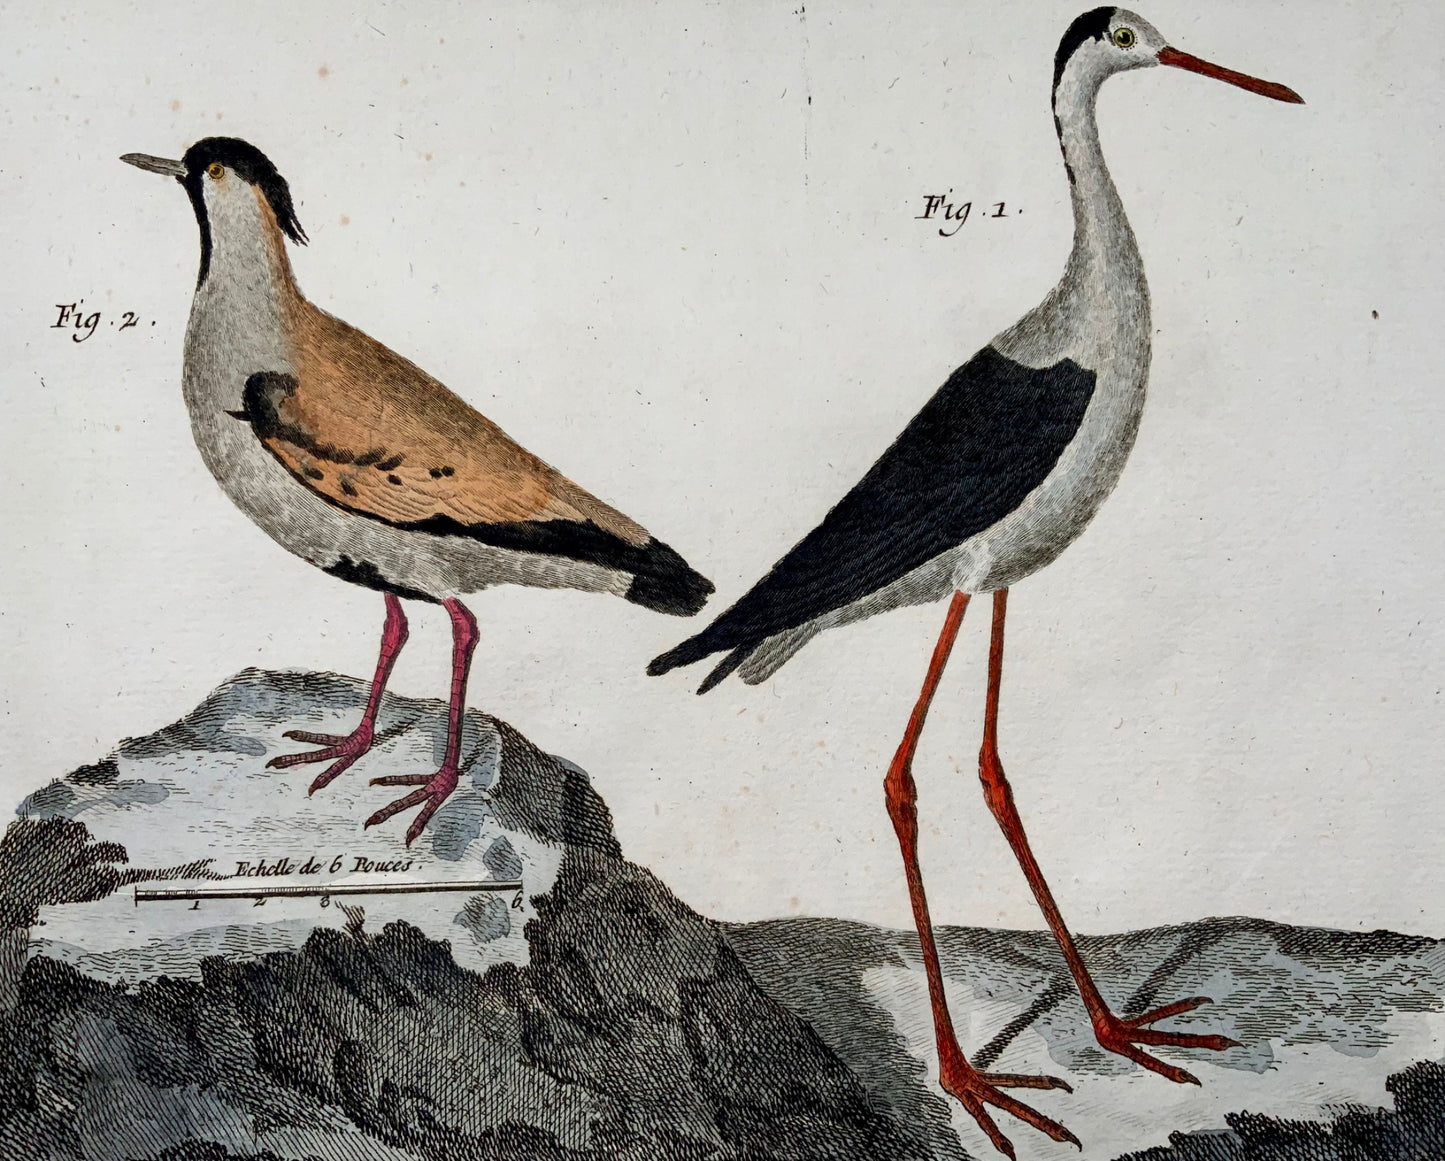 1751 Lawing, Jacana, Pluvier, ornithologie, Martinet, grand in-folio, couleur main